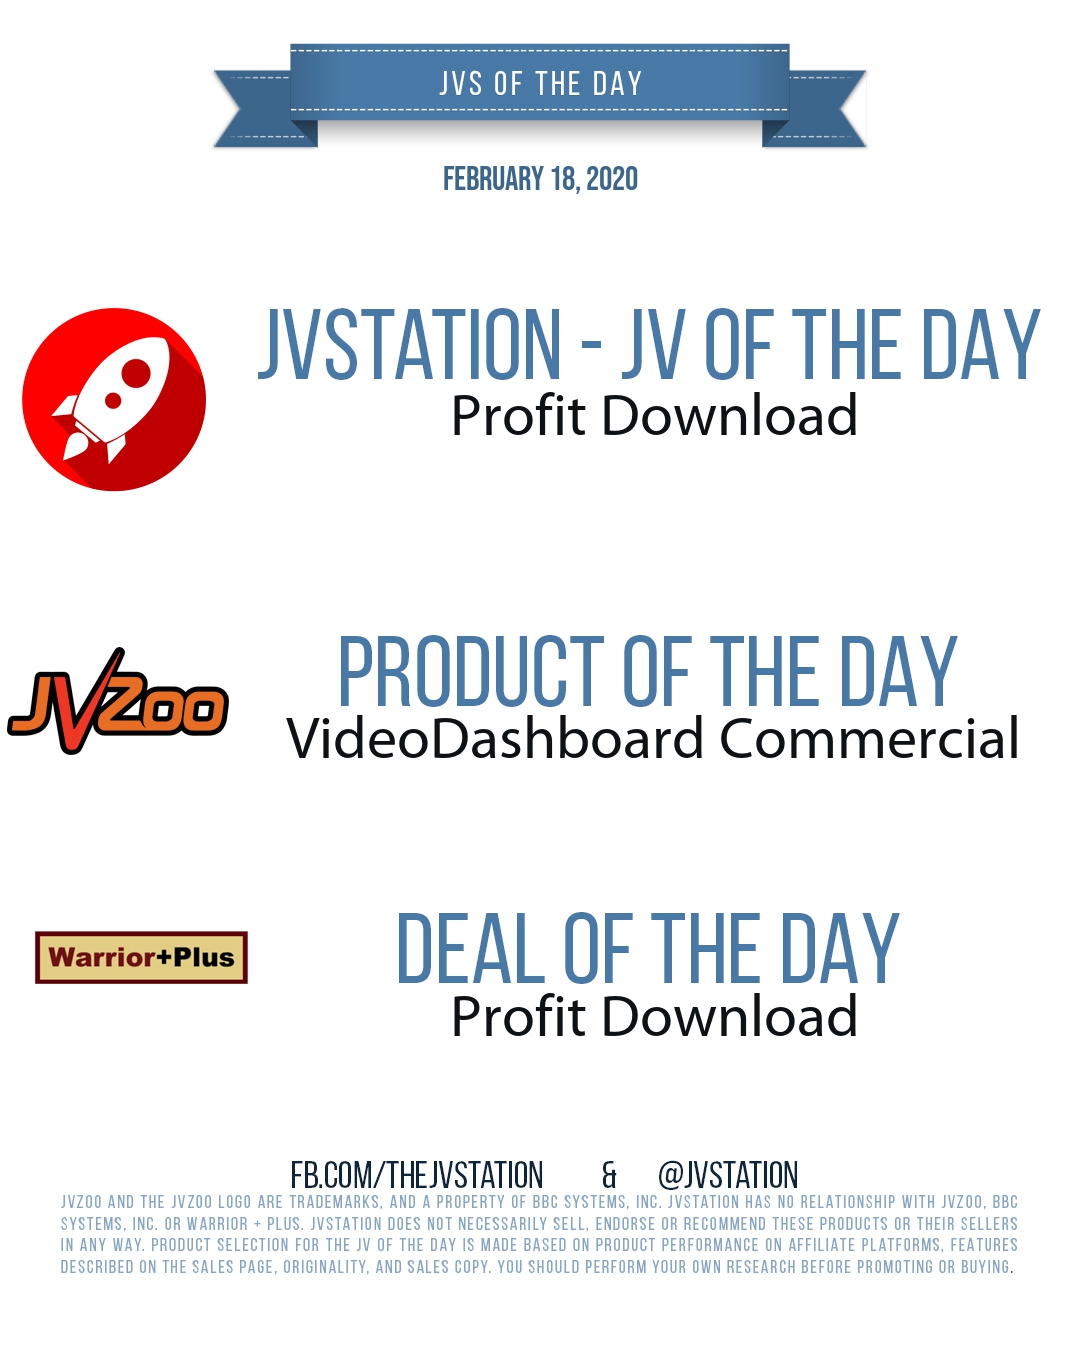 JVs of the day - February 18, 2020